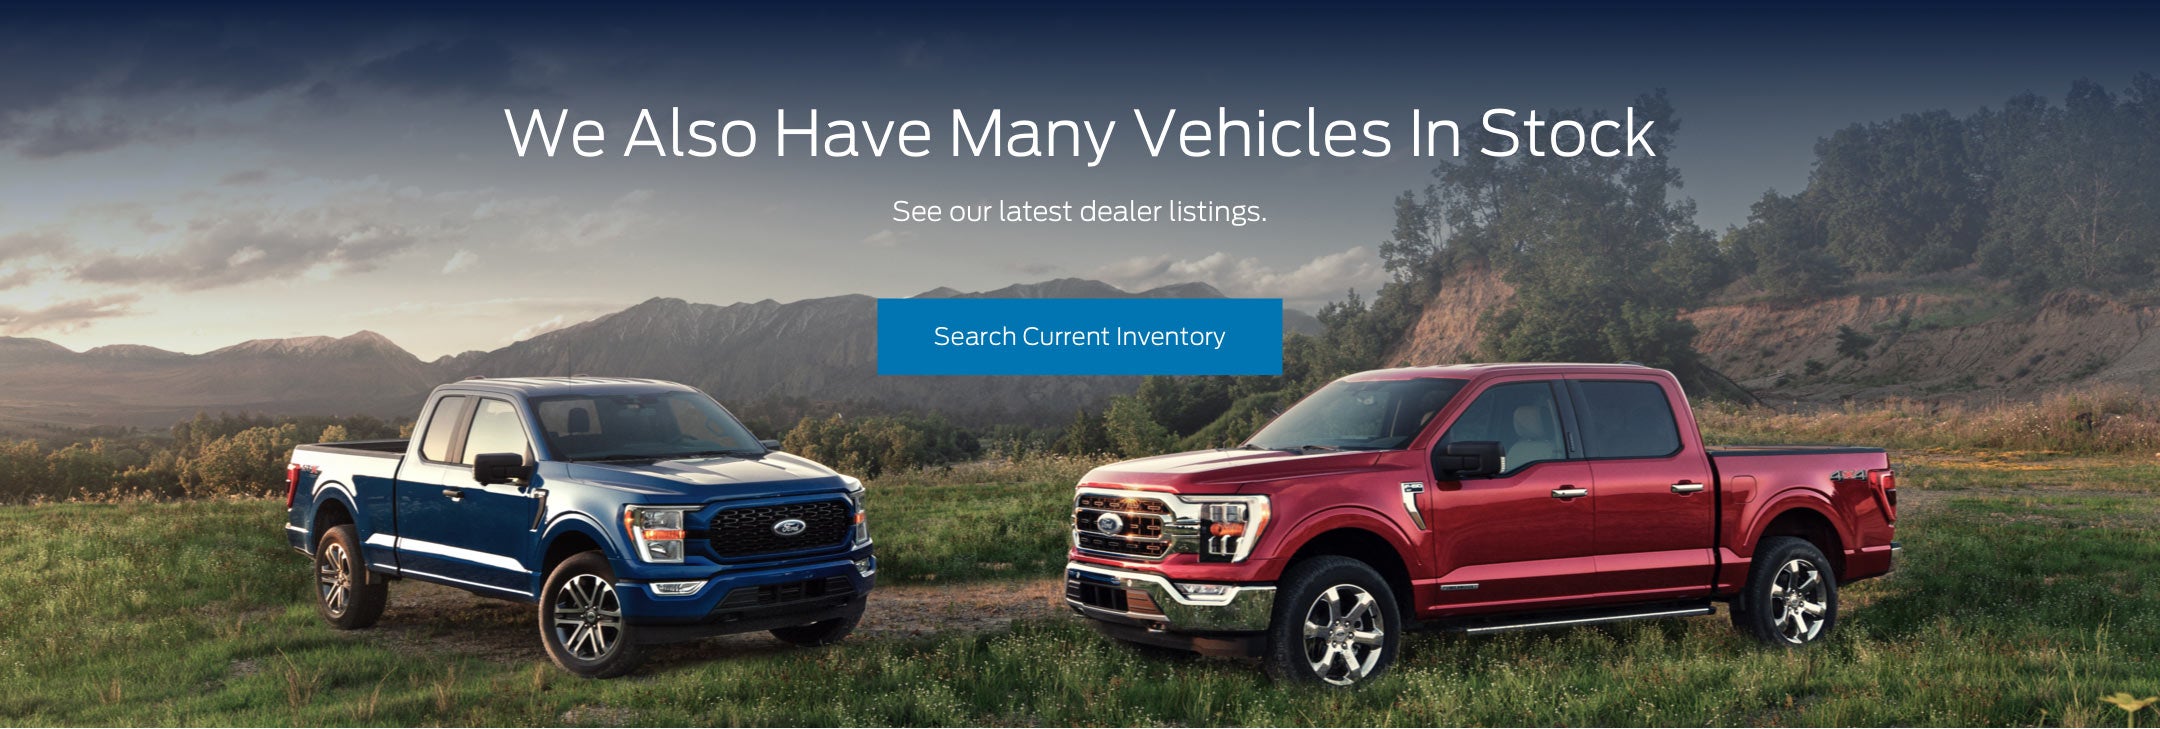 Ford vehicles in stock | Stanley Ford Eastland in Eastland TX